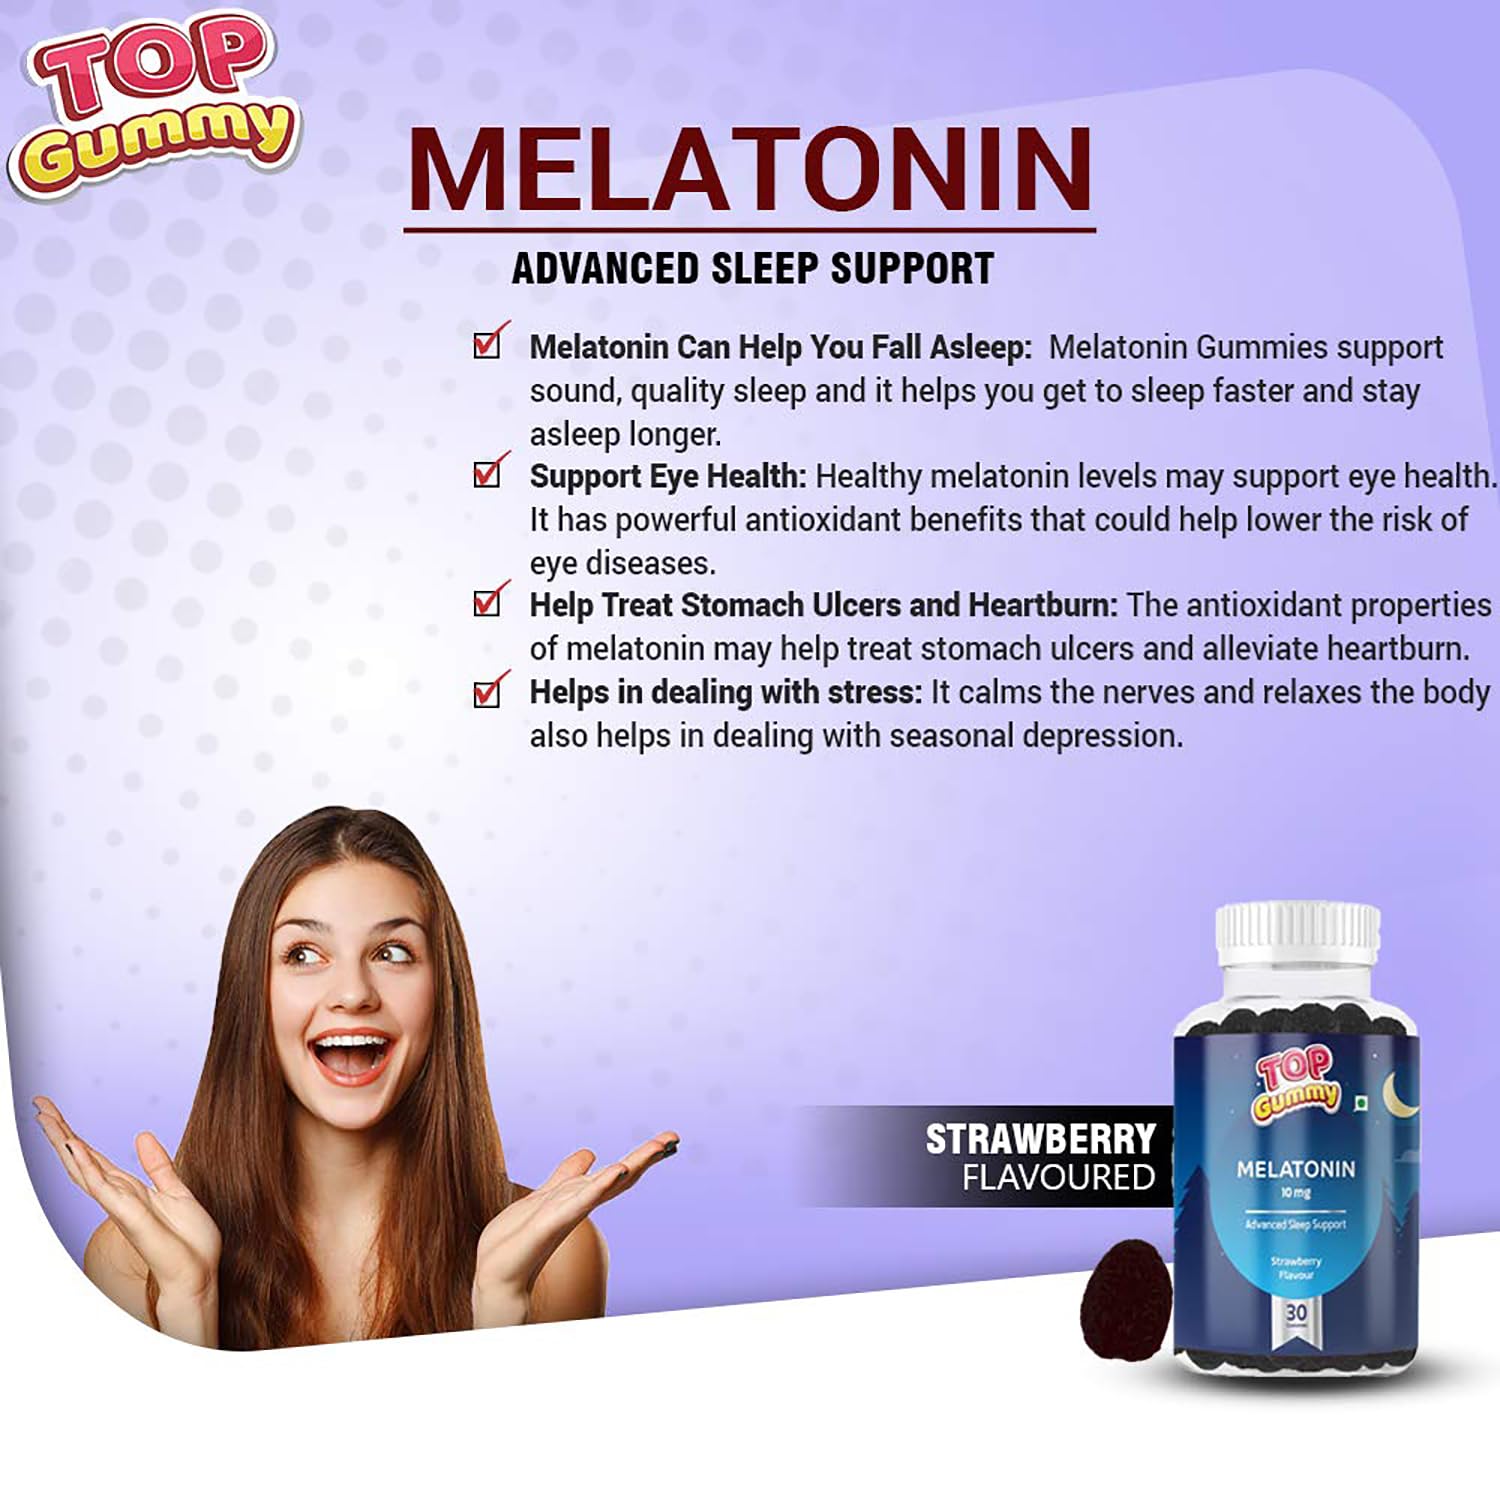 Top Gummy Melatonin 10mg | Advanced Sleep Support, Stay Asleep Longer, Easy to Take, Dissolves in Mouth, Faster Absorption | Gluten, Soy & Dairy Free – 30 Gummies (Strawberry Flavour) (Pack of 2)